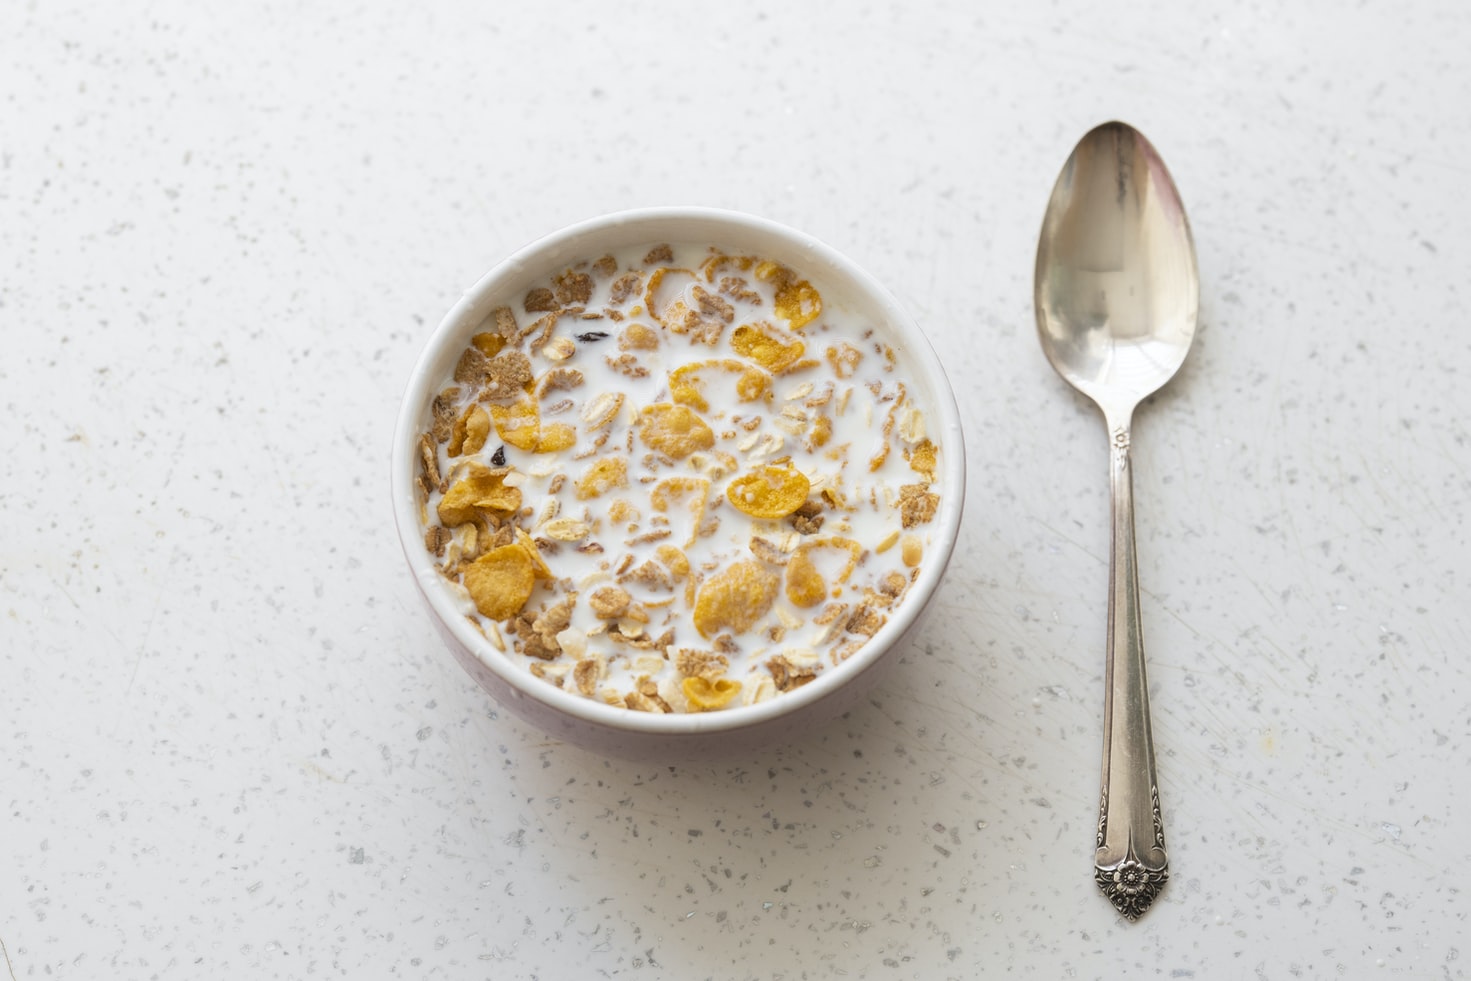 Which Magic Spoon Cereal Should You Try First